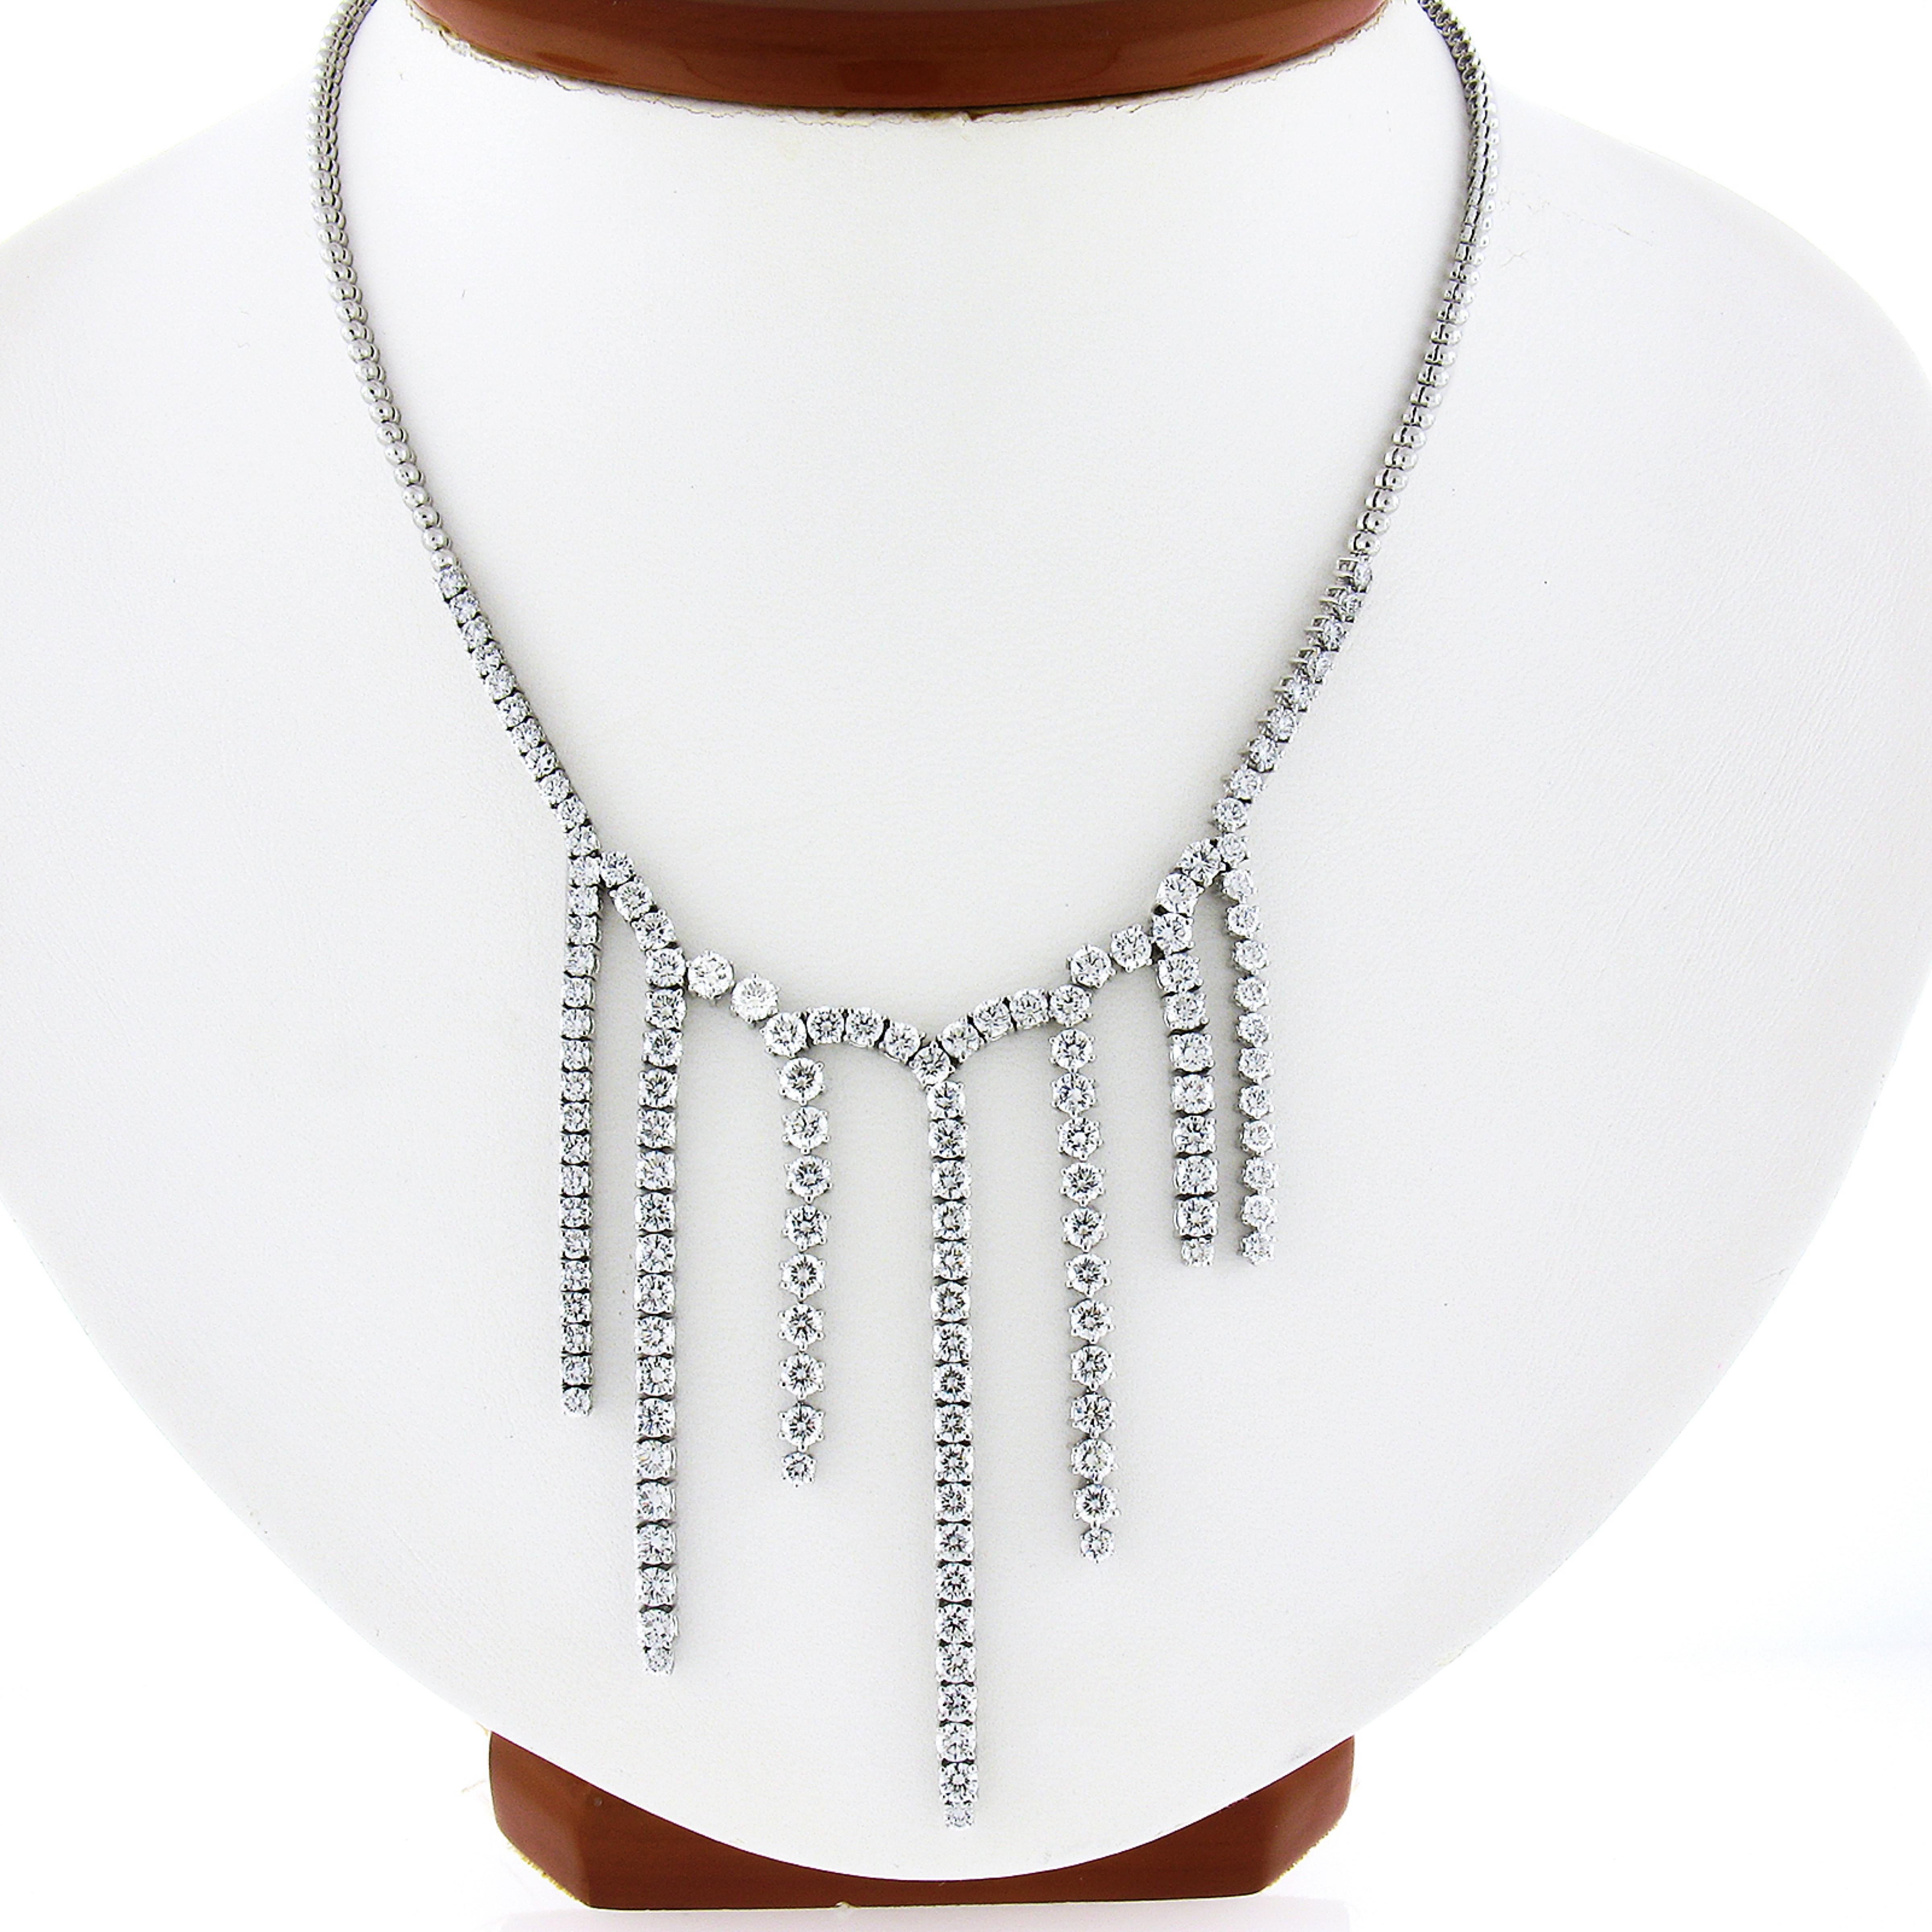 This fancy statement diamond necklace is very well crafted in solid platinum and features approximately 8.40 carats of very fine quality diamonds that are set in an incredible chandelier style that elegantly dangles across its center. These 135